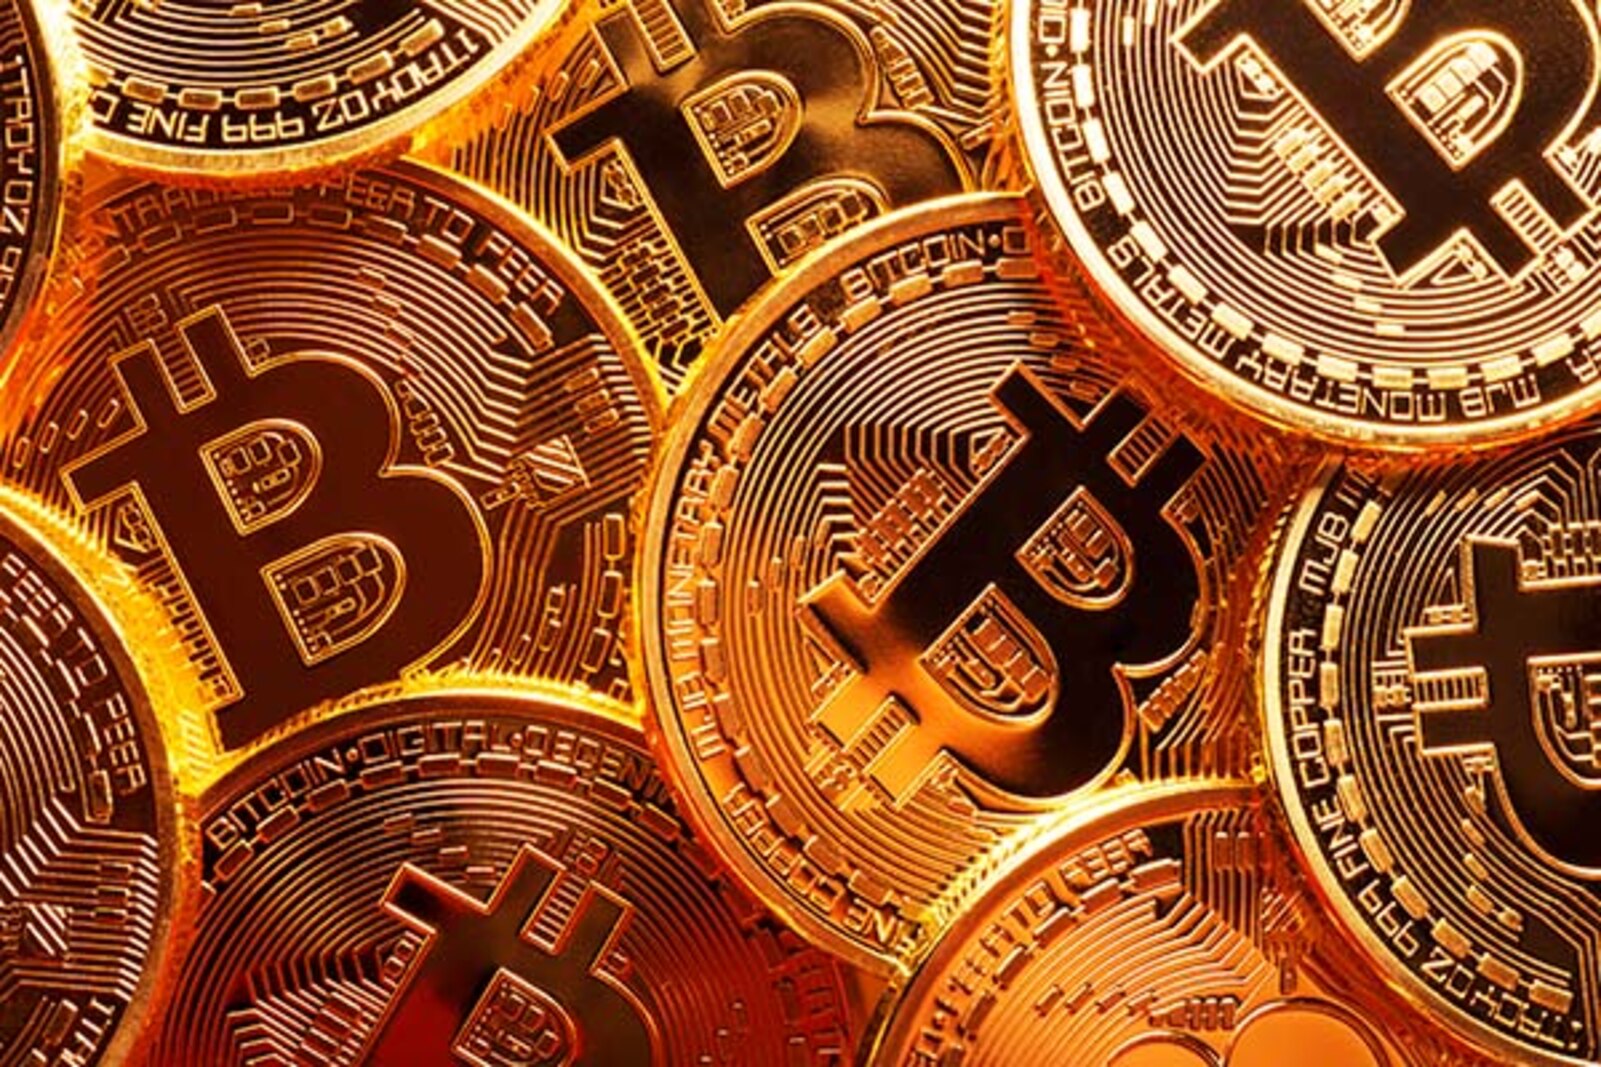 Close-up photo of several gold plated bitcoins together symbolizing the bitcoin market.